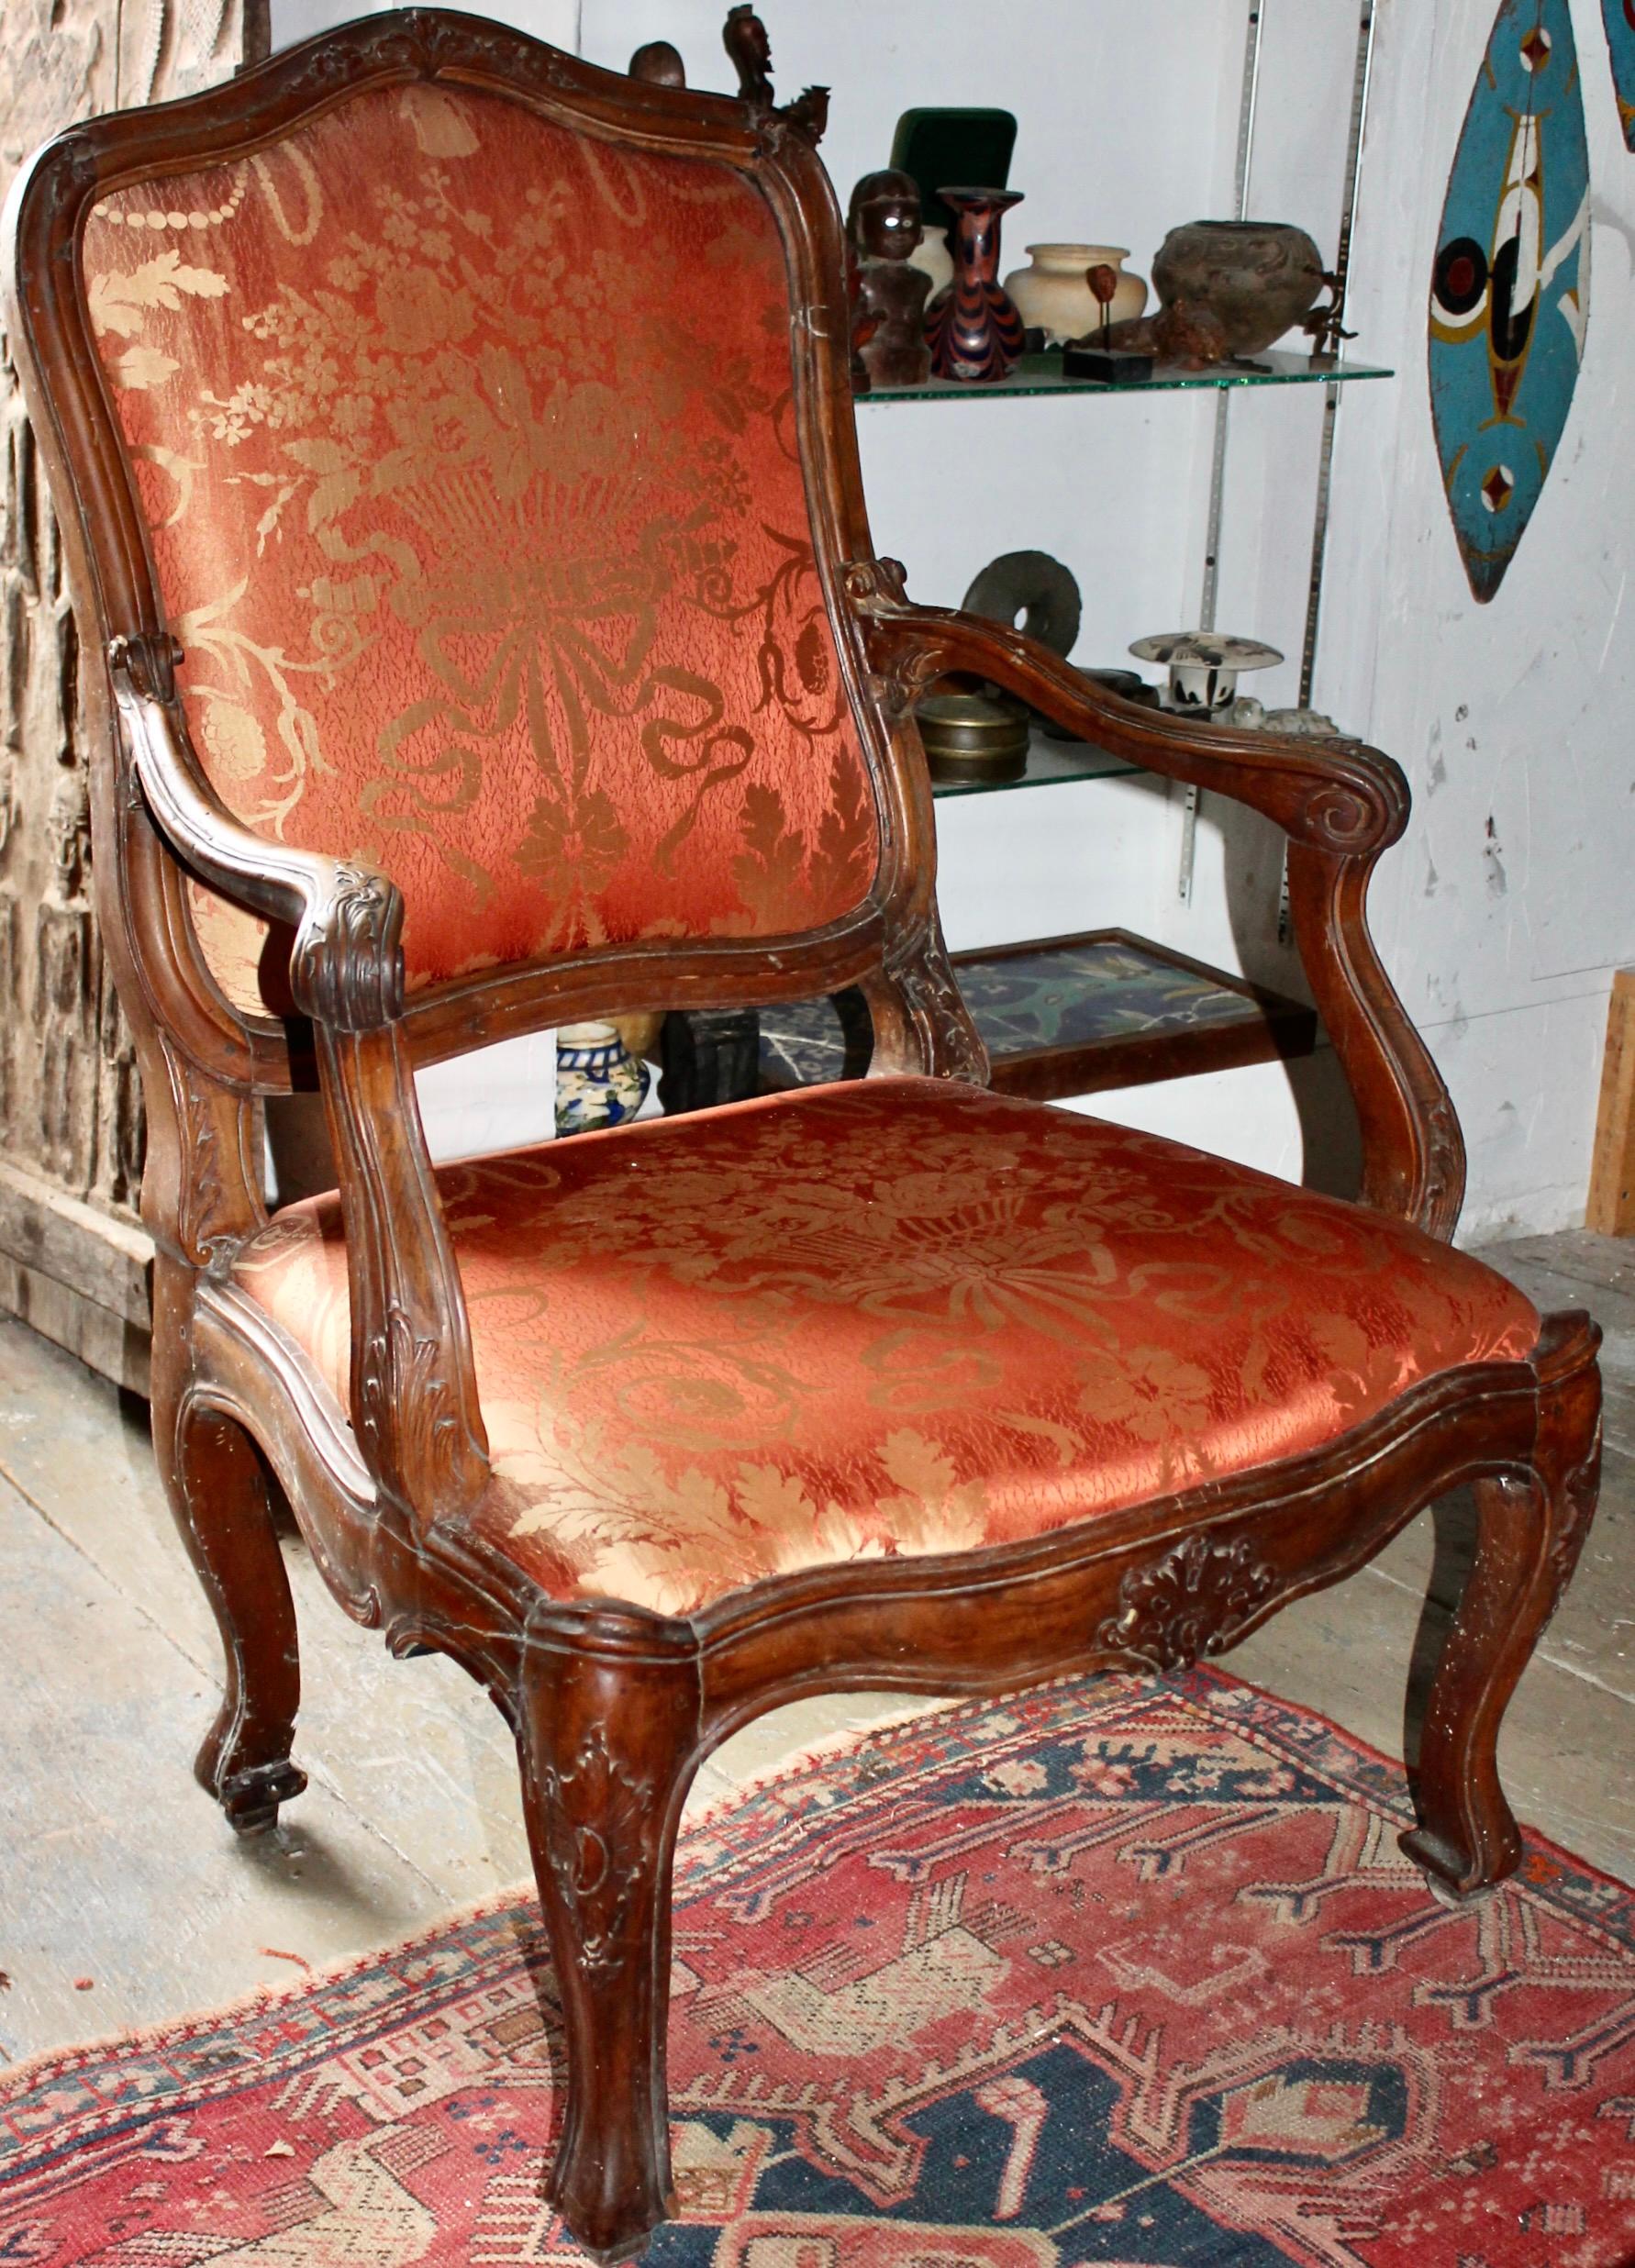 A large beautifully carved Walnut Armchair, Italian late eighteenth century in Louis XV style. Reupholstered.